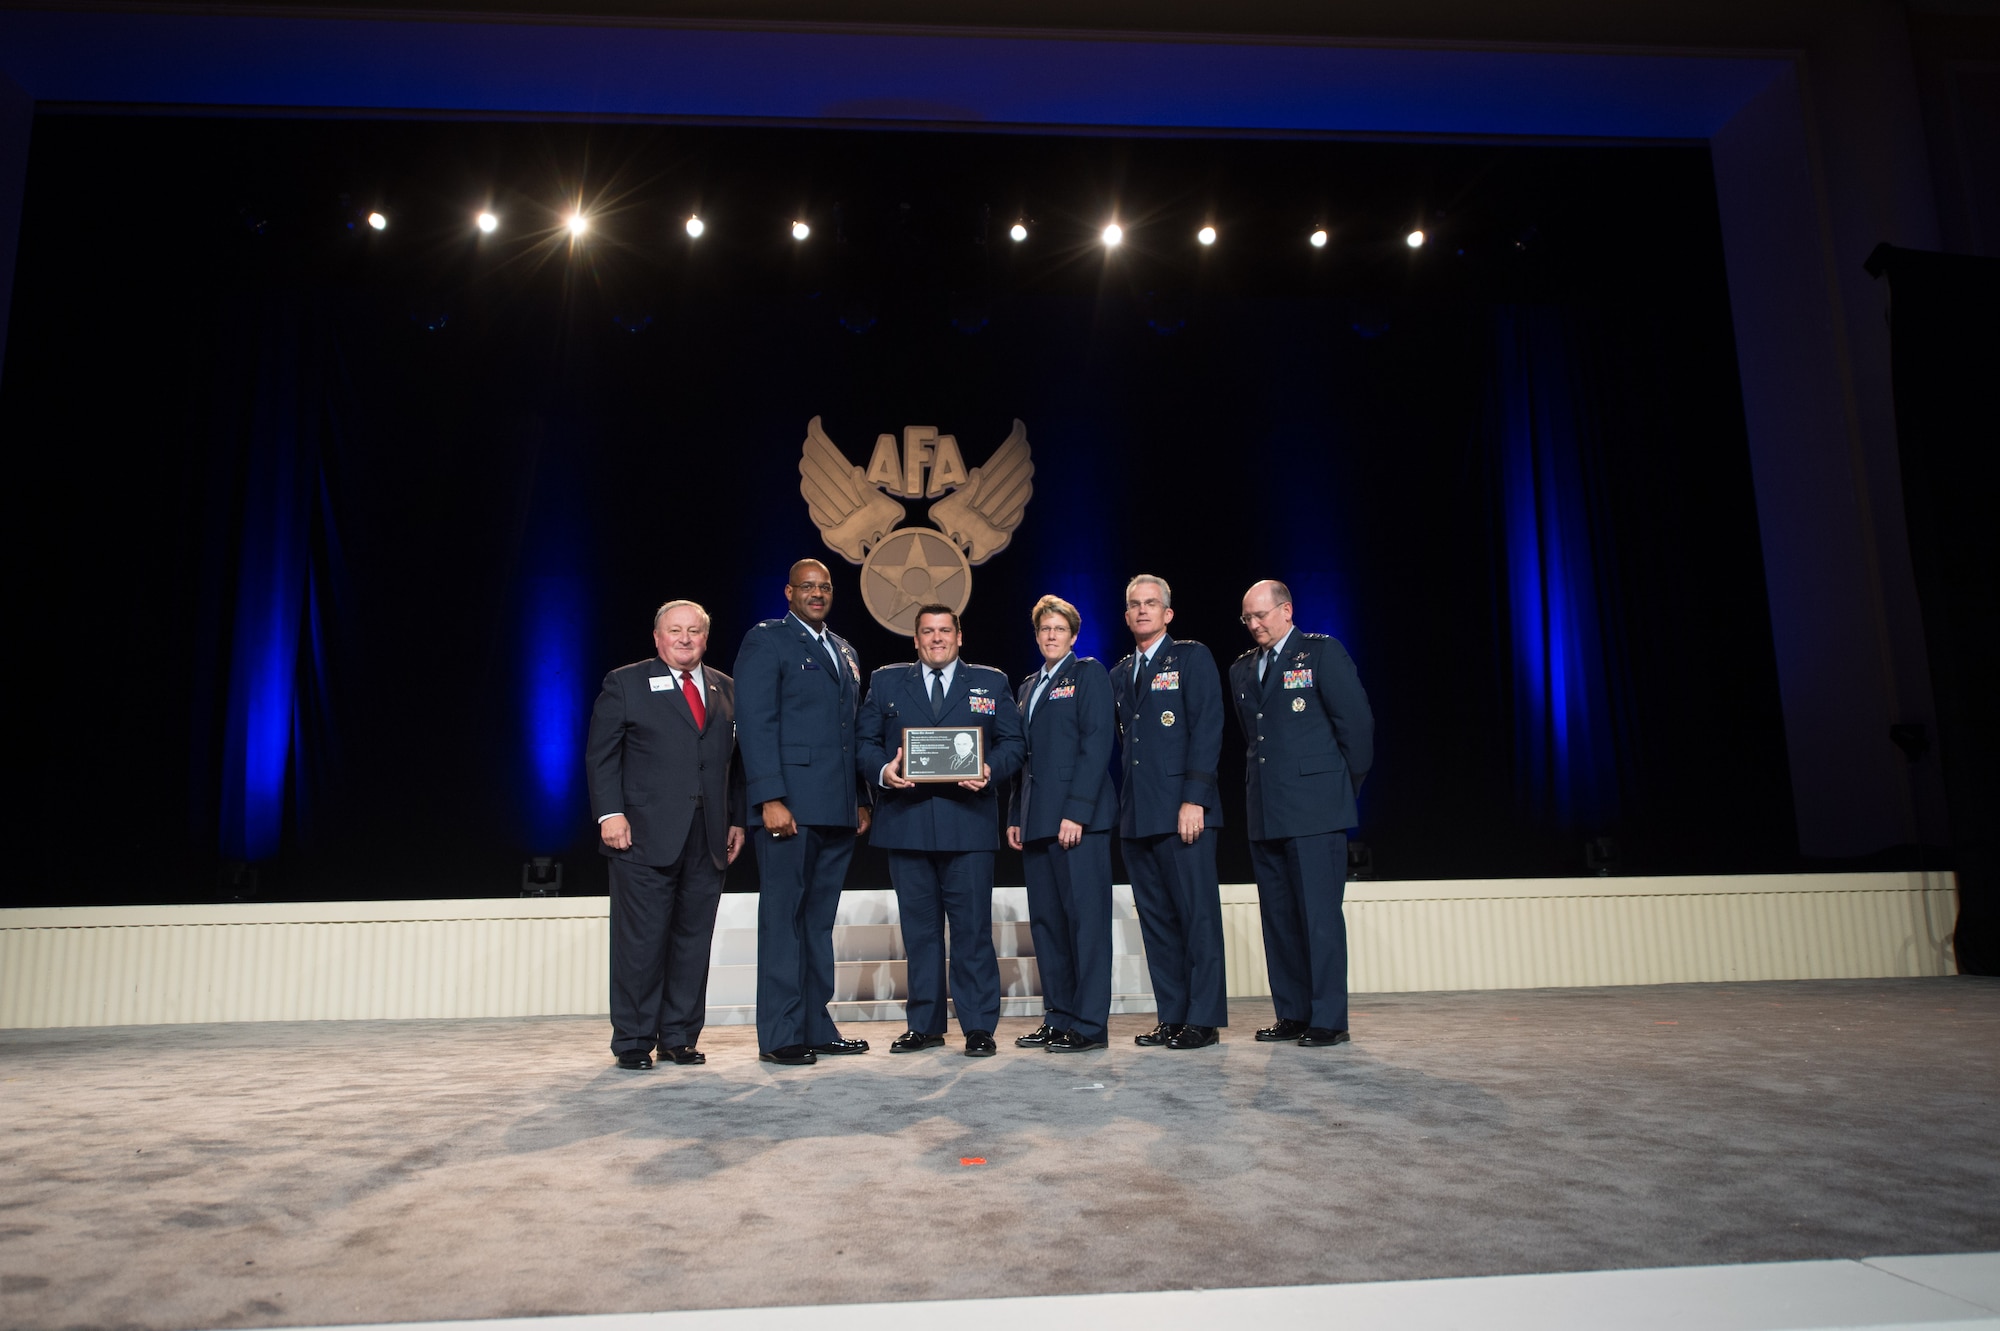 The 931st Operations Support Squadron and the 22nd Operations Support Squadron were recently awarded the Verne Orr award at the Air Force Association's conference in Washington.The award recognizes the best utilization of human resources in the United States Air Force for total force integration. Pictured in the photo (left to right) retired Lt. Gen. George Muellner, chairman, AFA, Lt. Col. Esteban Ramirez, who recently assumed command of the 931st OSS, Lt. Col. Martin Daack, commander, 22nd OSS, Lt. Col. Stacy Wharton, former 931st OSS Commander, Gen. Paul Selva, Air Mobility Command commander, and Lt. Gen. James Jackson, Air Force Reserve Command commander. (Photo courtesy of Air Force Association)